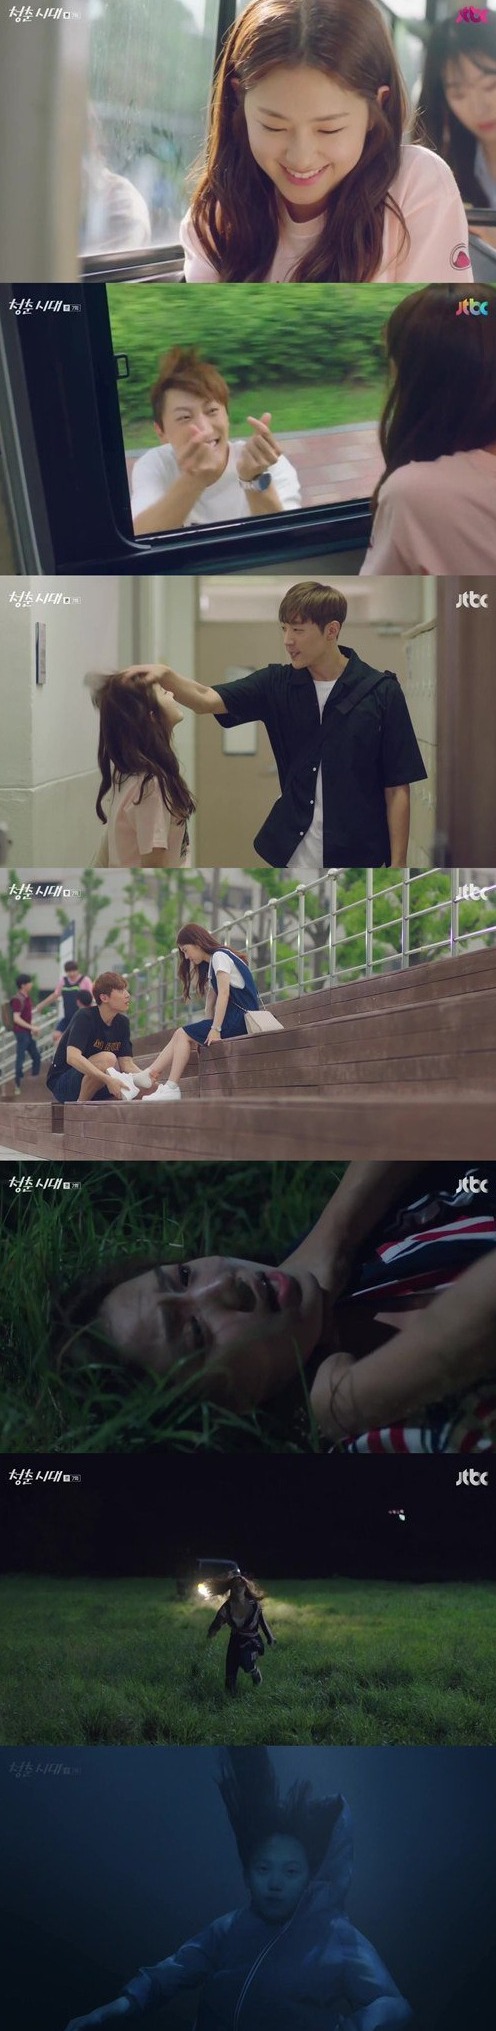 episodes 7 and 8 captures for the Korean drama 'Age of Youth'